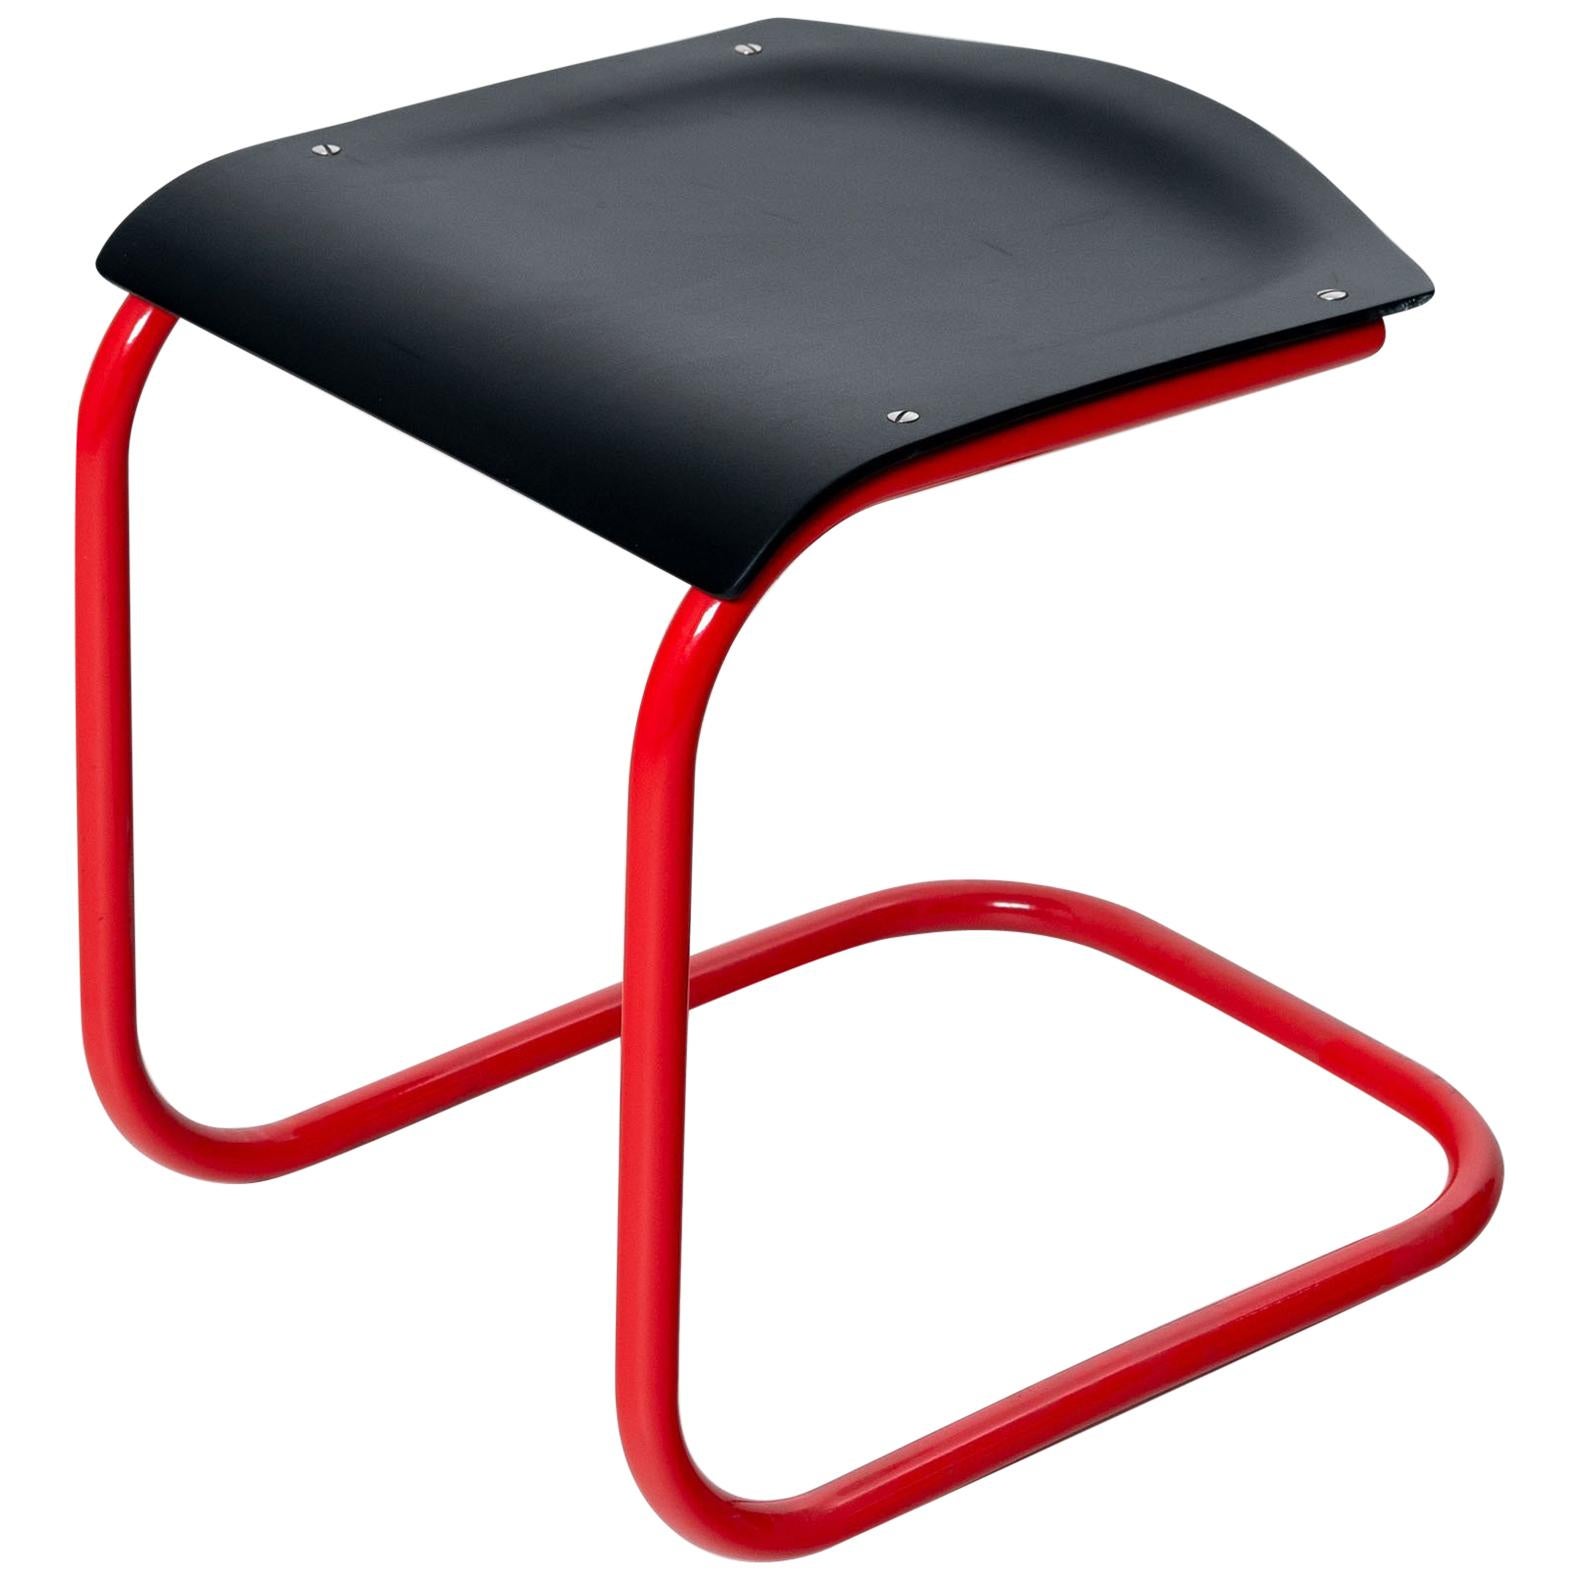 Mart Stam Bauhaus Stool in Black and Red For Sale